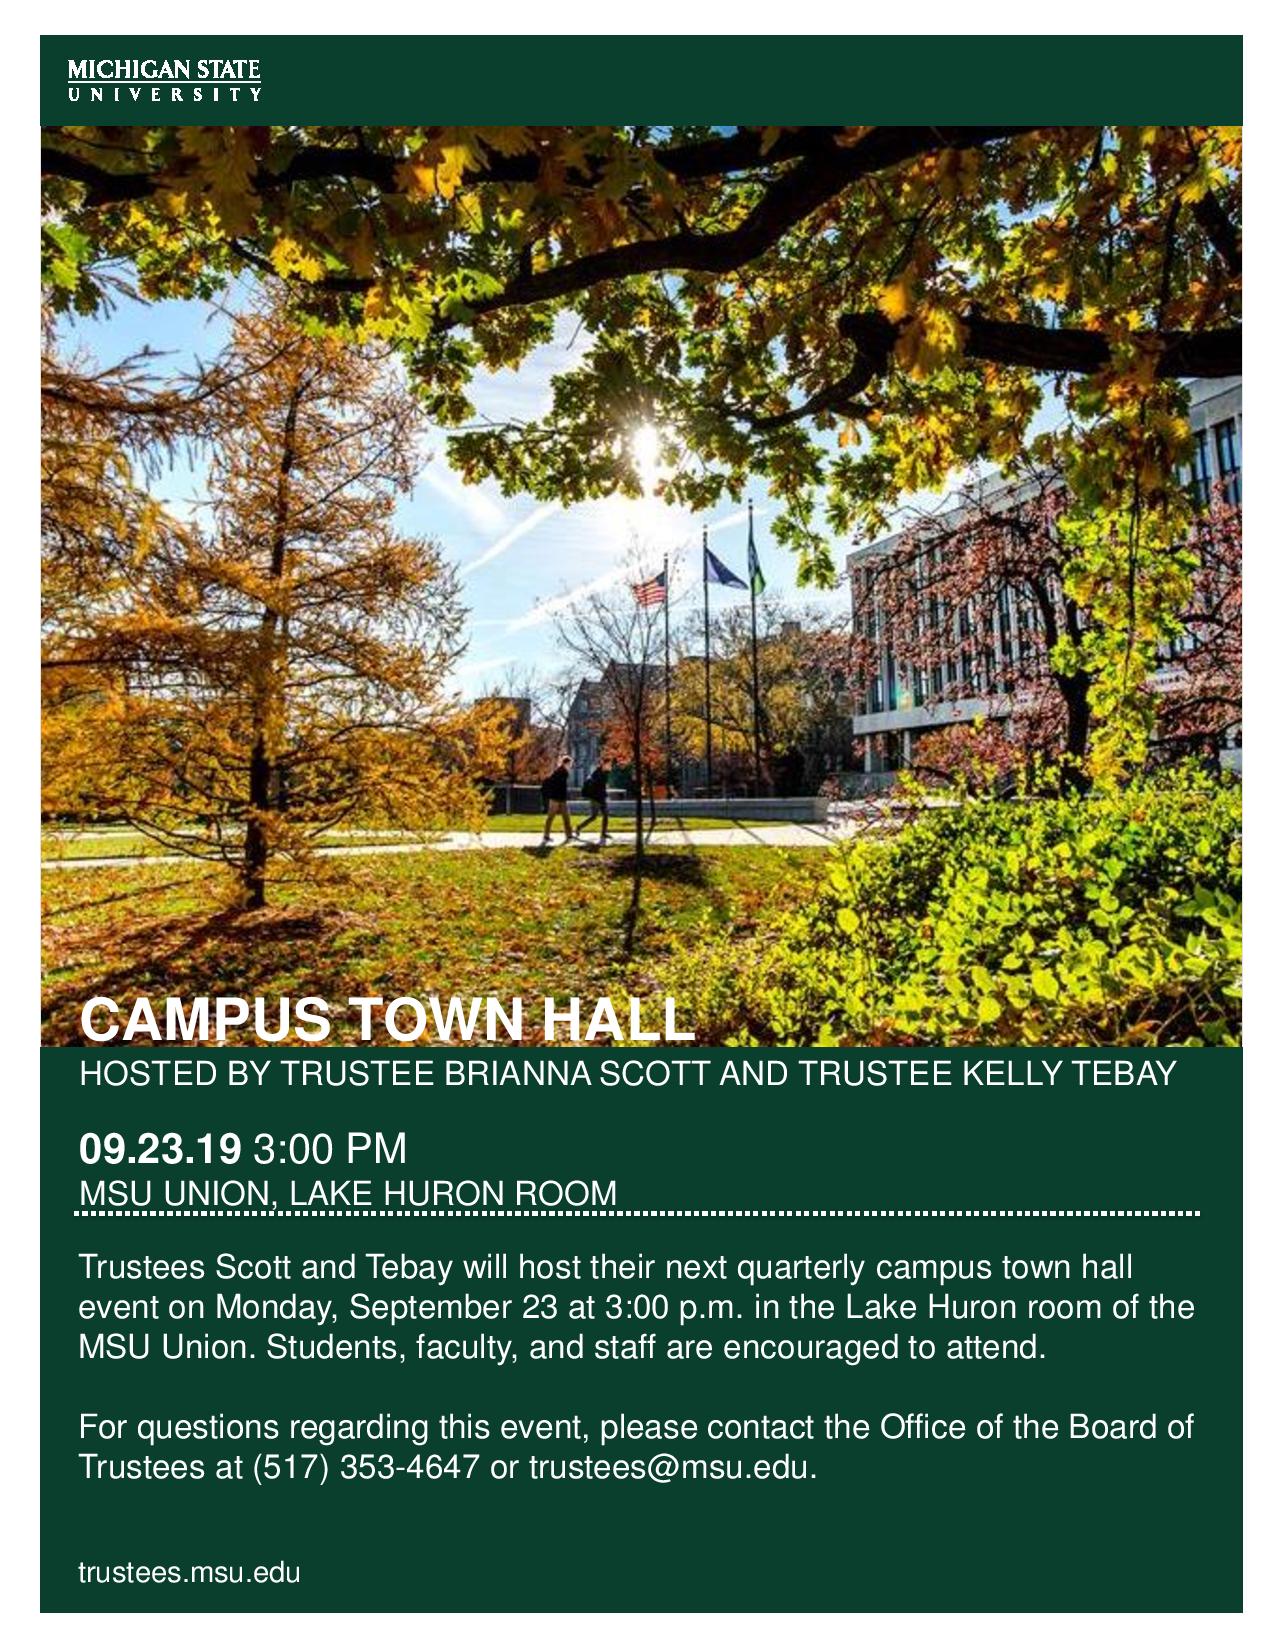 Campus Town Hall